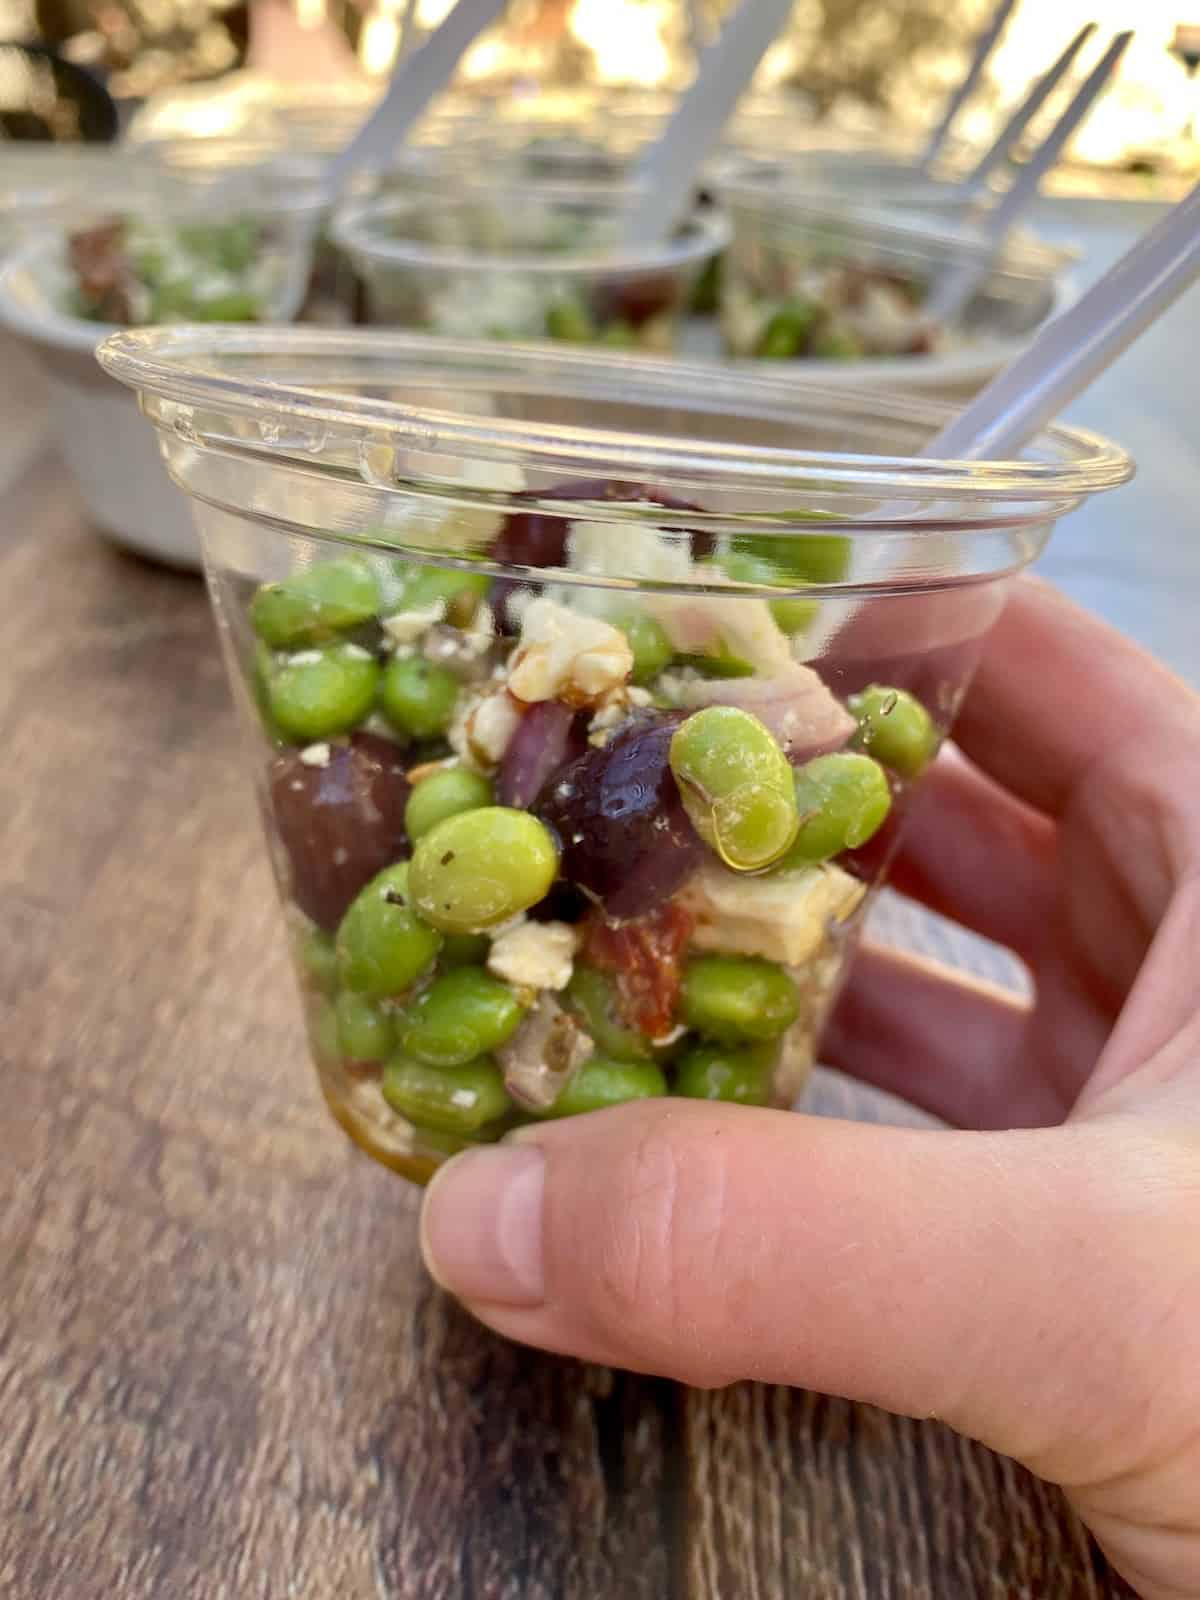 A single serving of edamame salad in a clear cup.